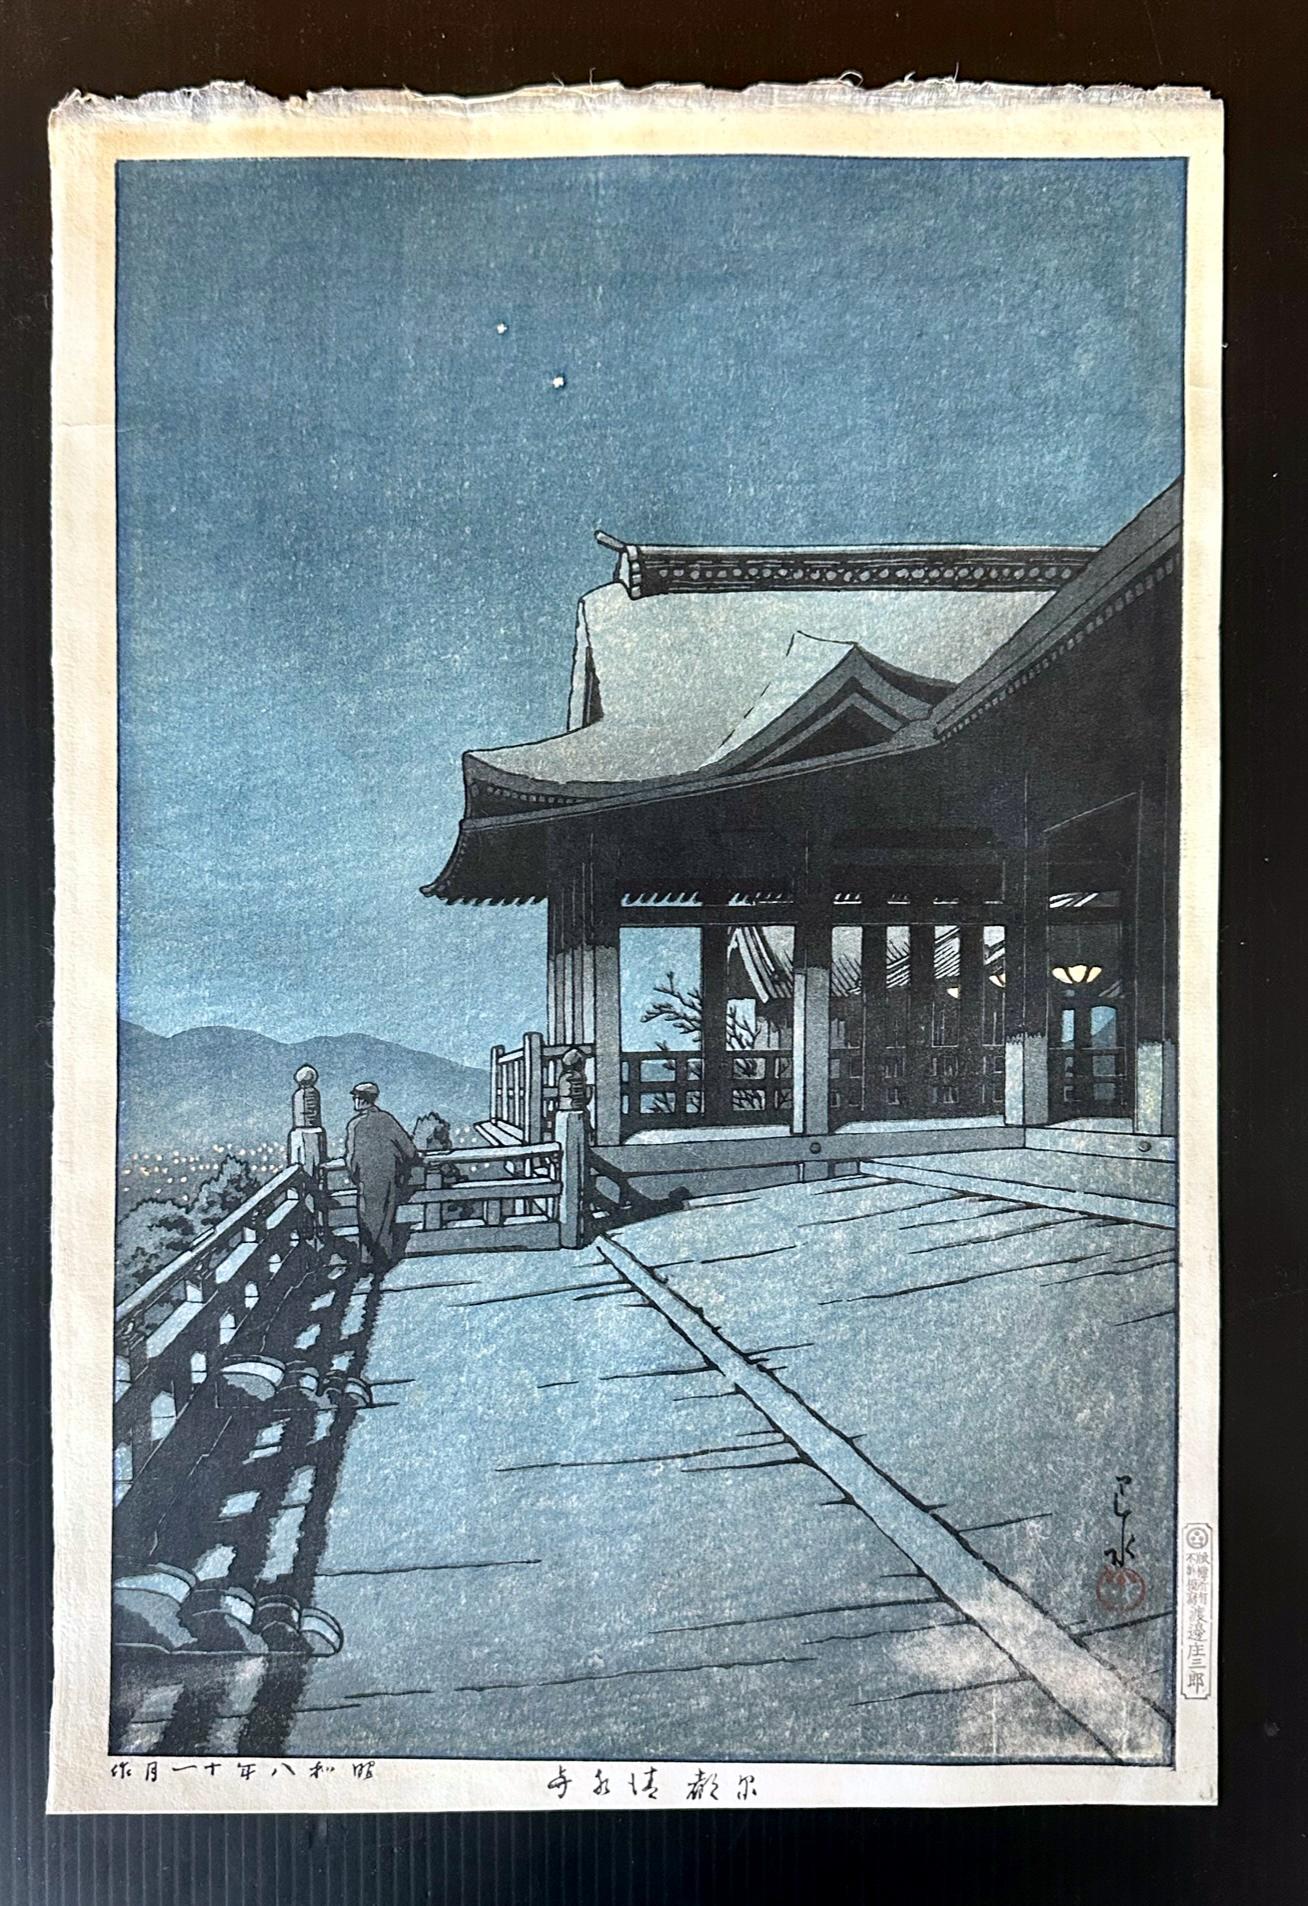 An early edition Japanese woodblock print 